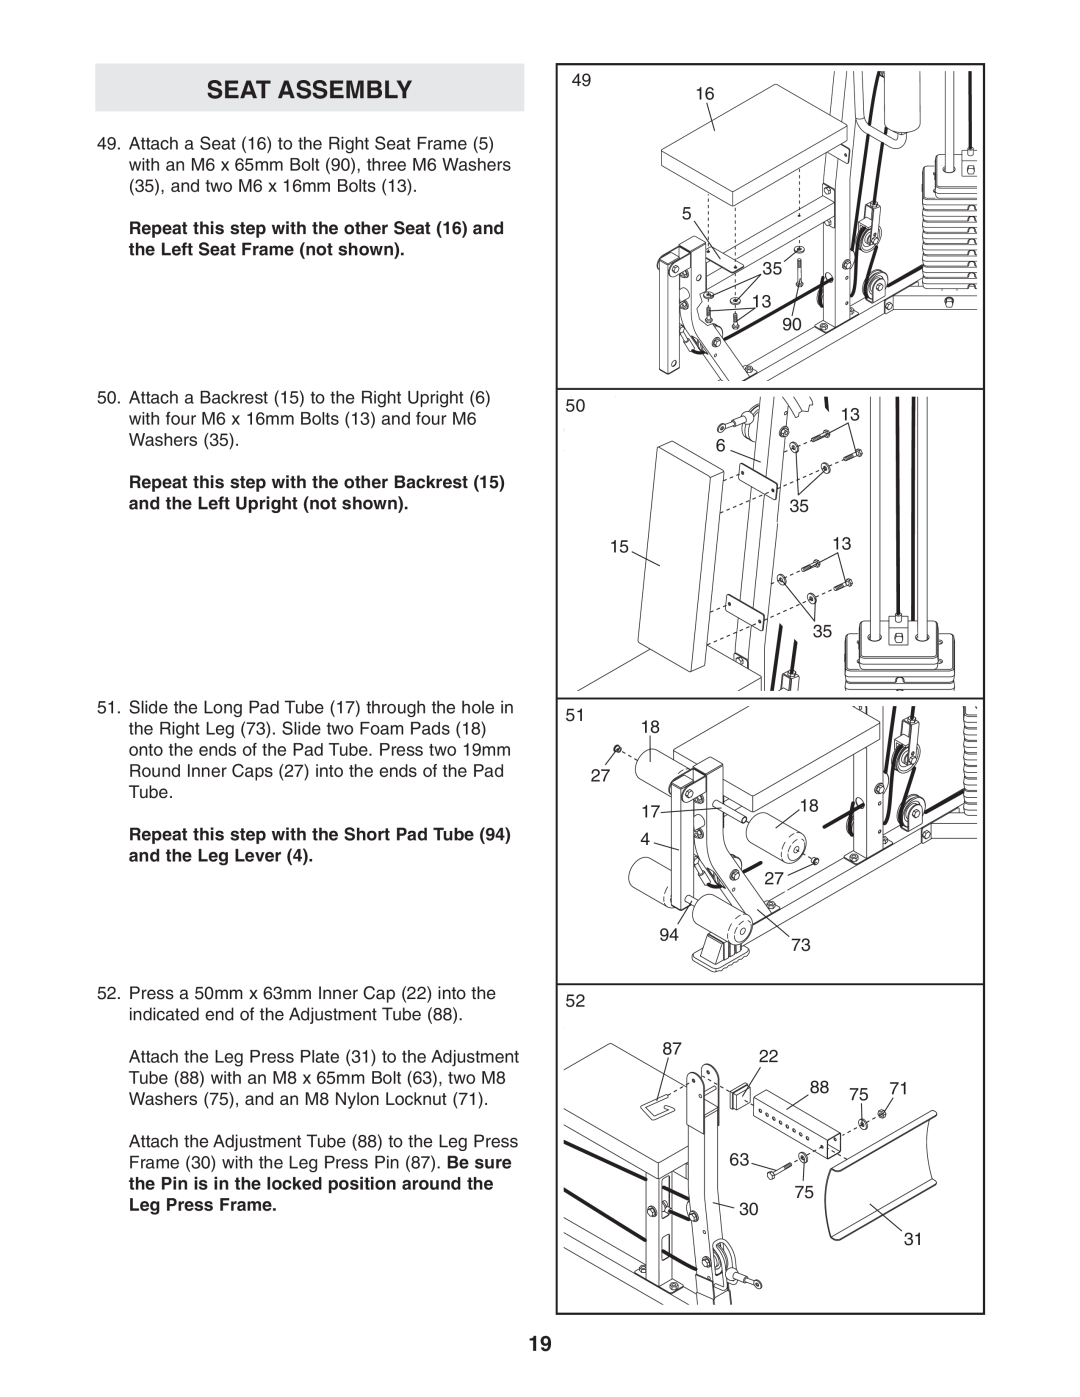 Weider 831.159822 user manual Seat Assembly, Repeat this step with the other Seat 16 and, the Left Seat Frame not shown 